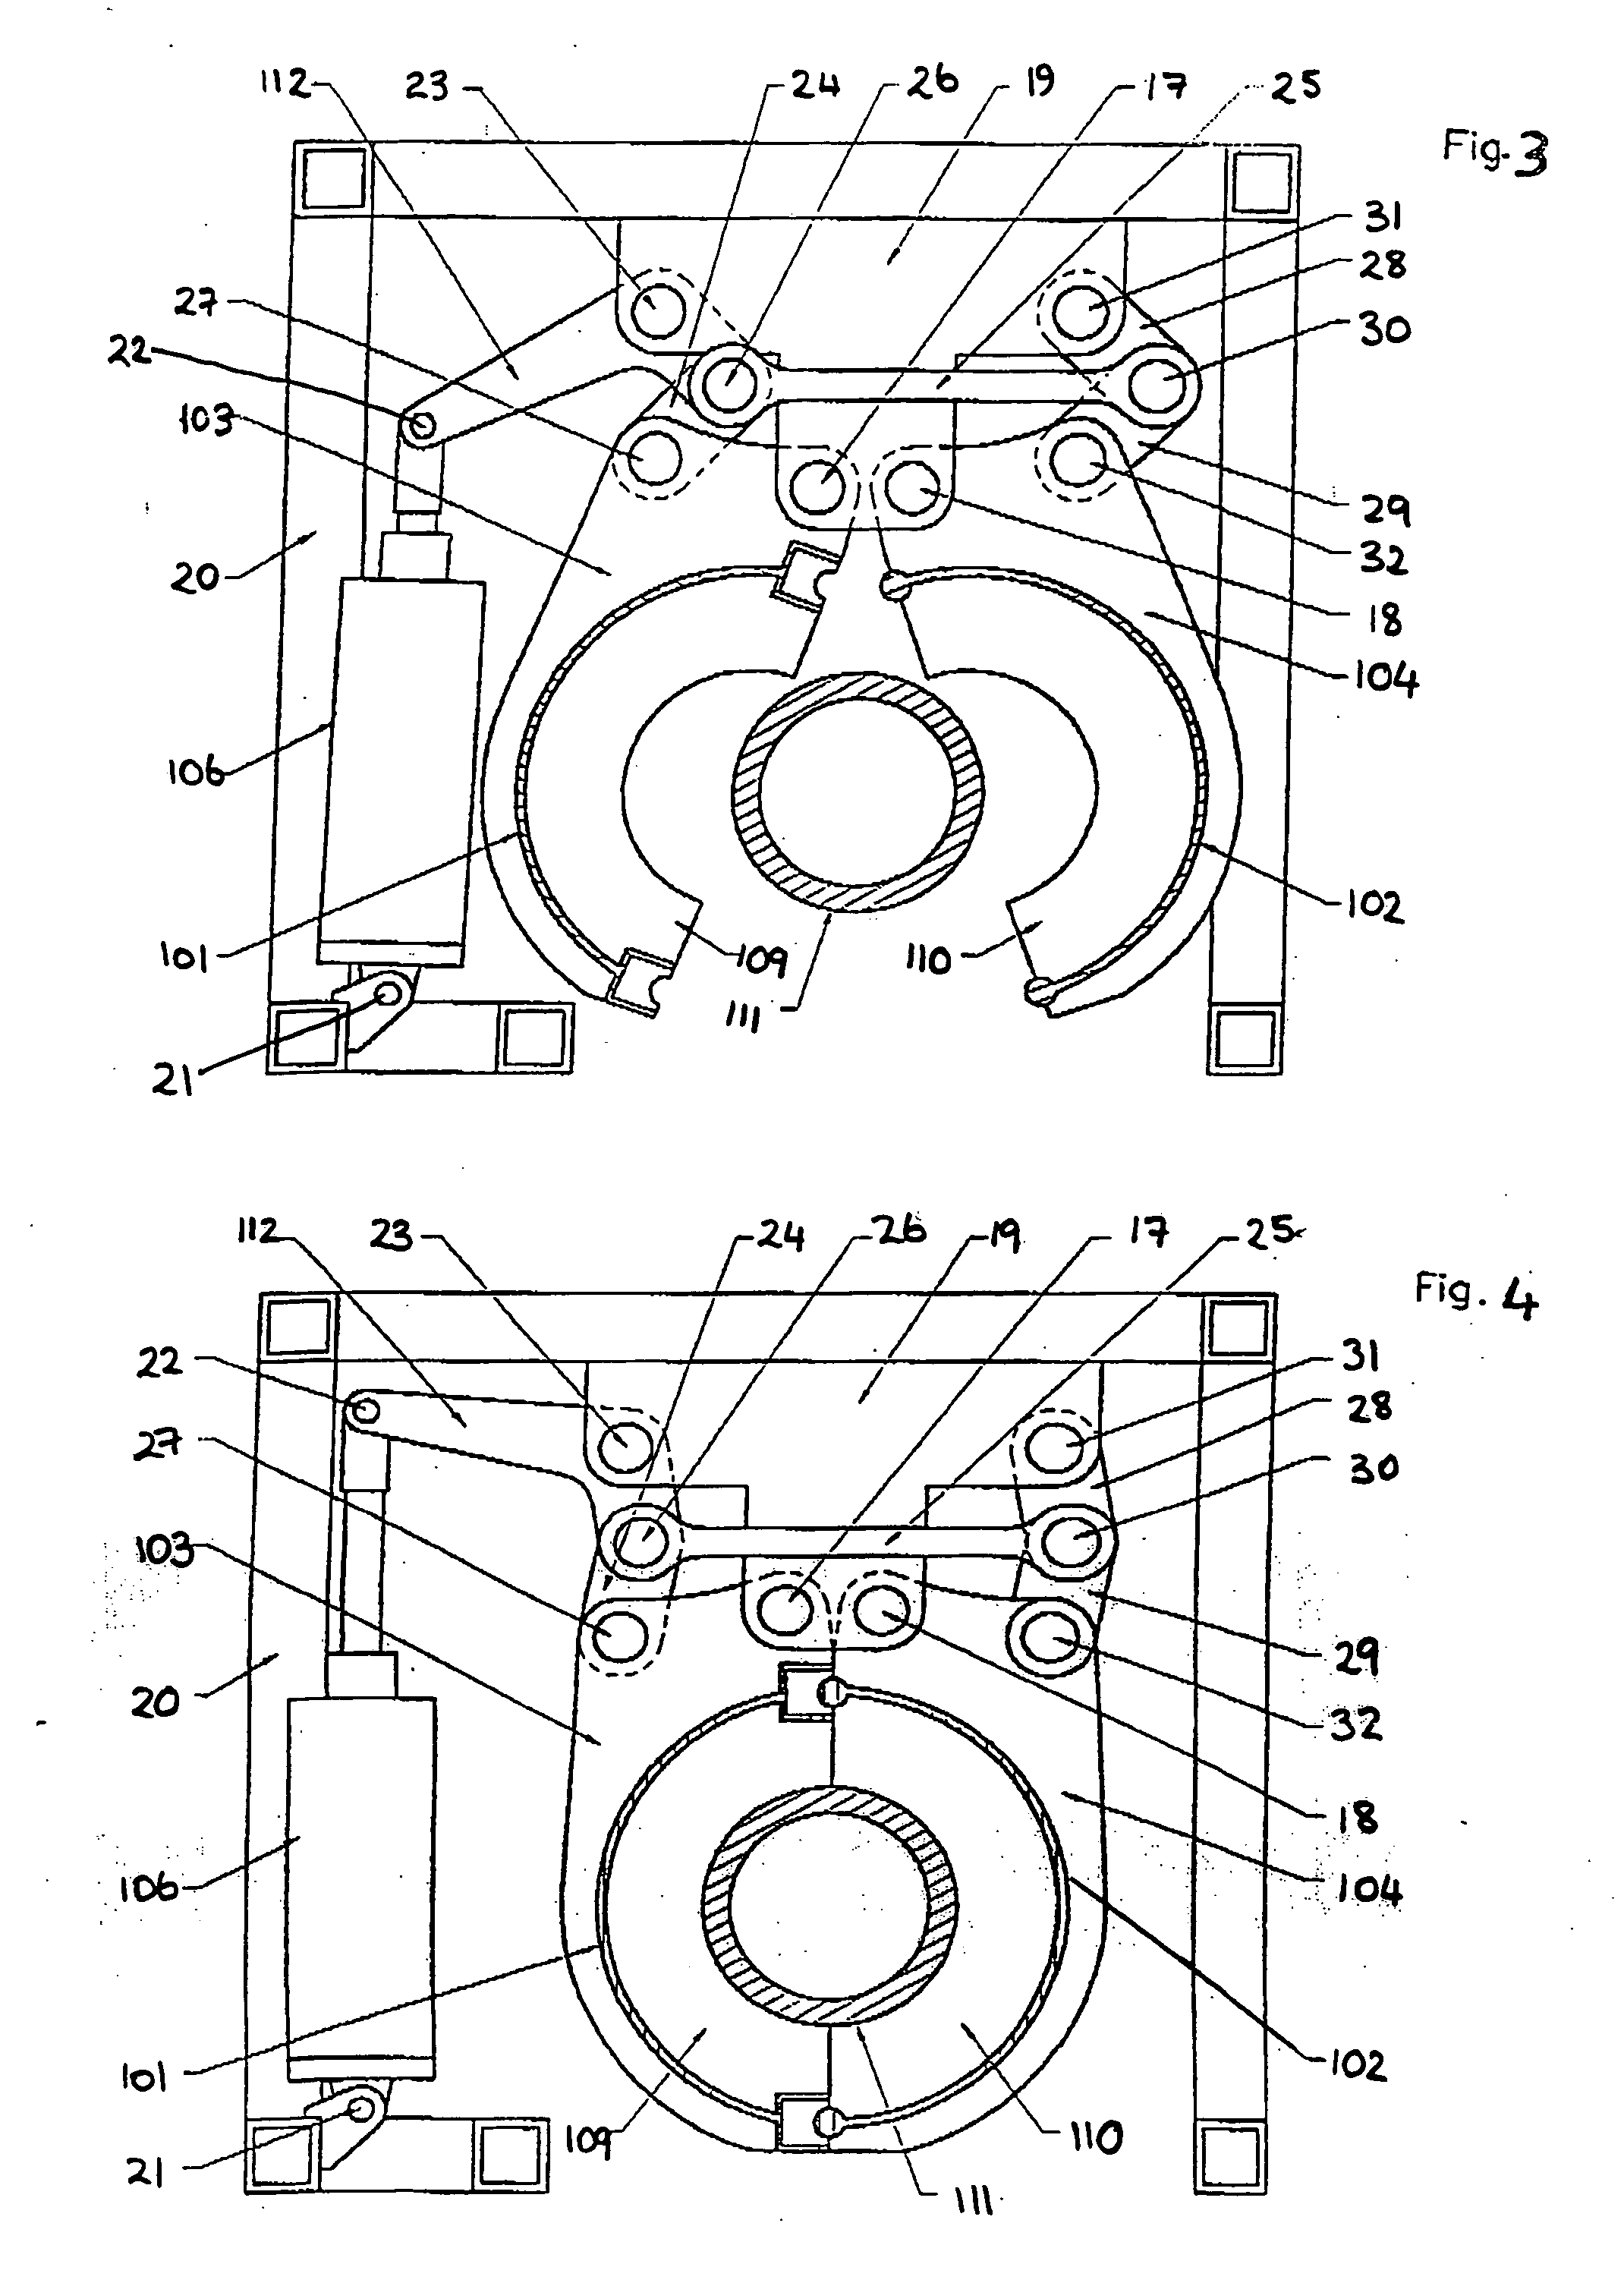 Fluid collecting device